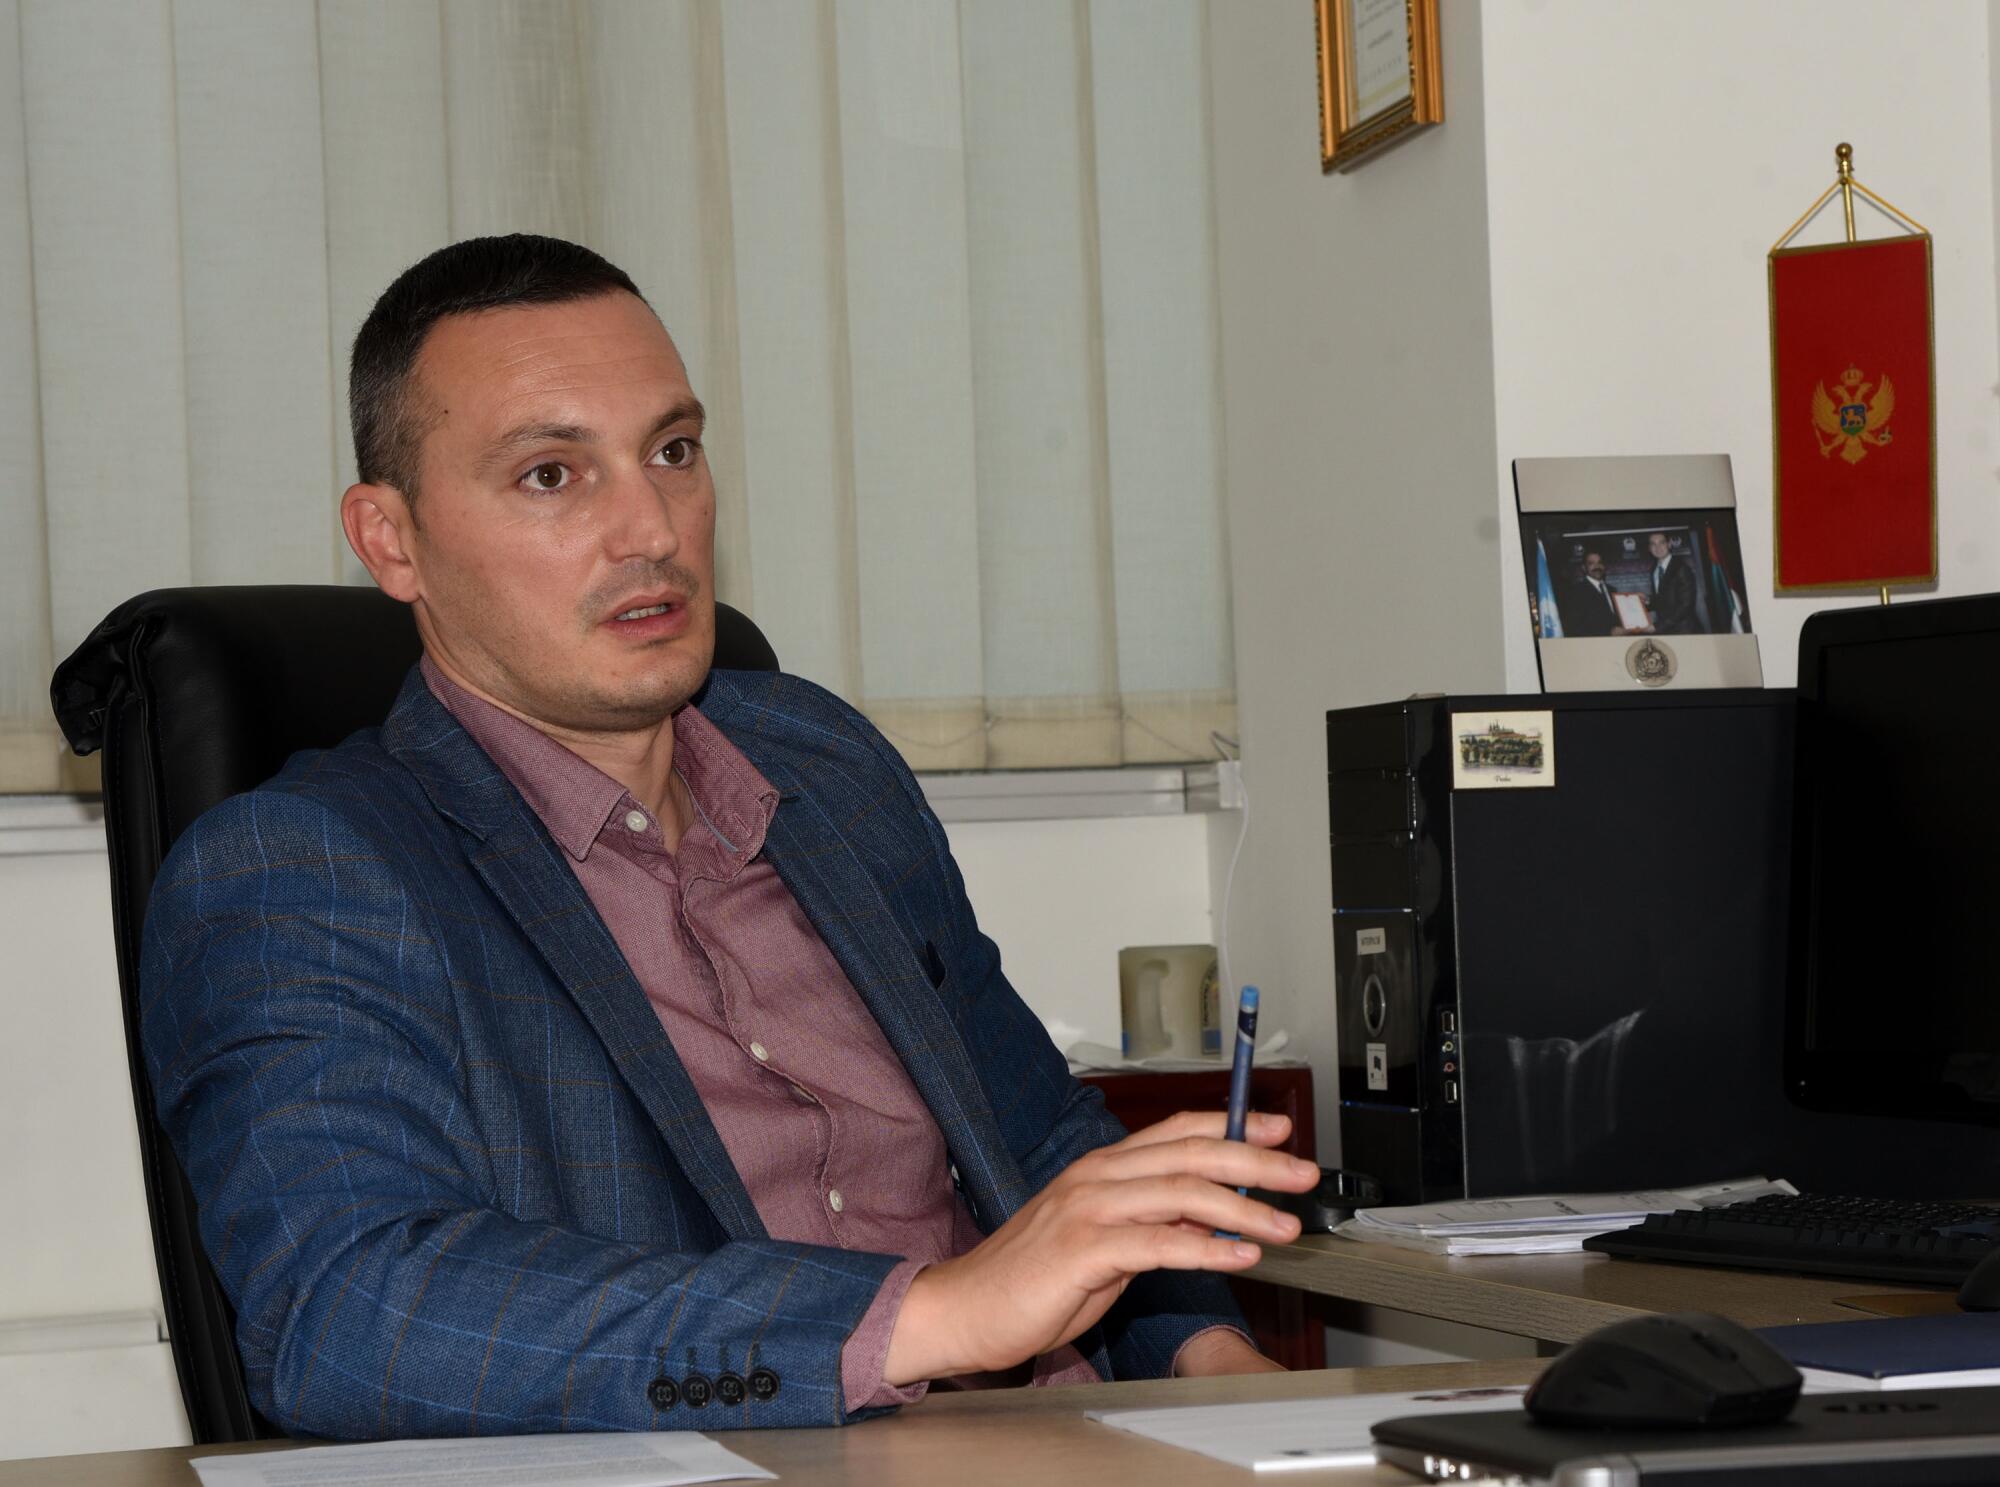 Dejan Boljević, chief of international police cooperation with the Montenegro Police, at his office in Podgorica.